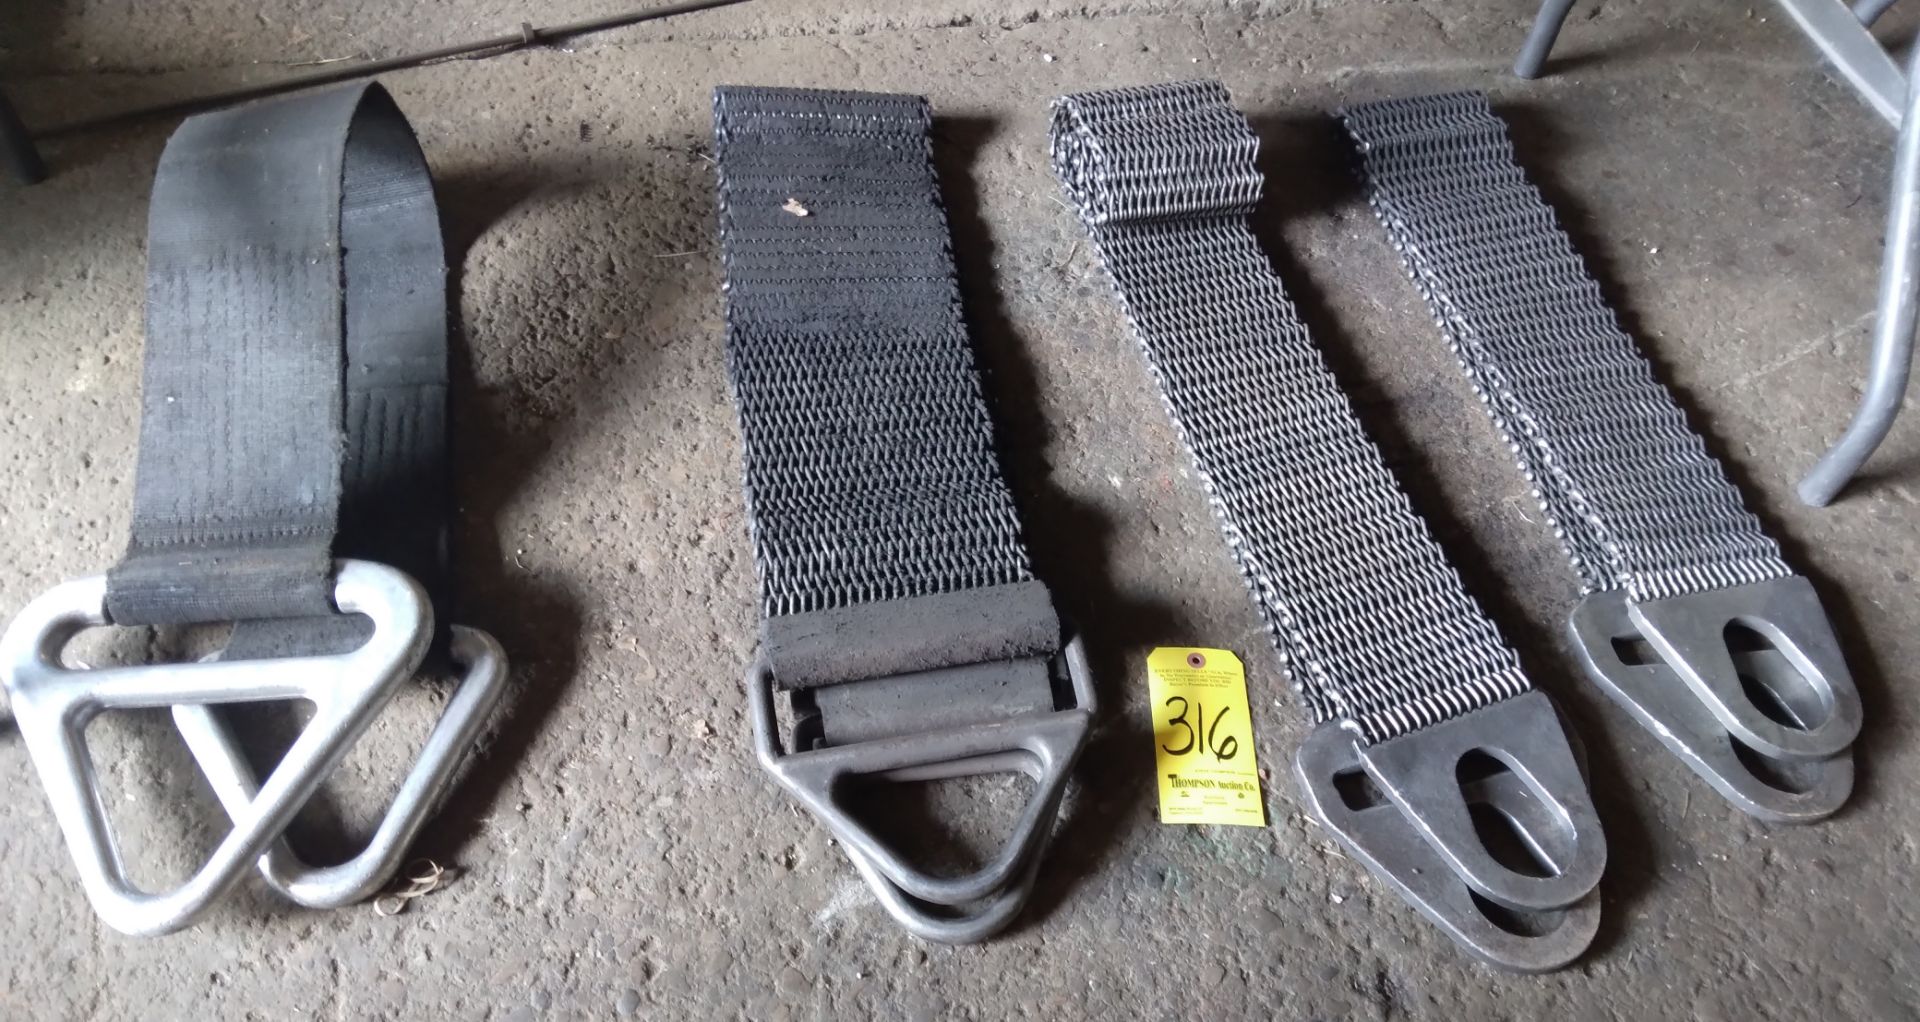 (3) Steel Lifting Straps and (1) Standard Lifting Straps